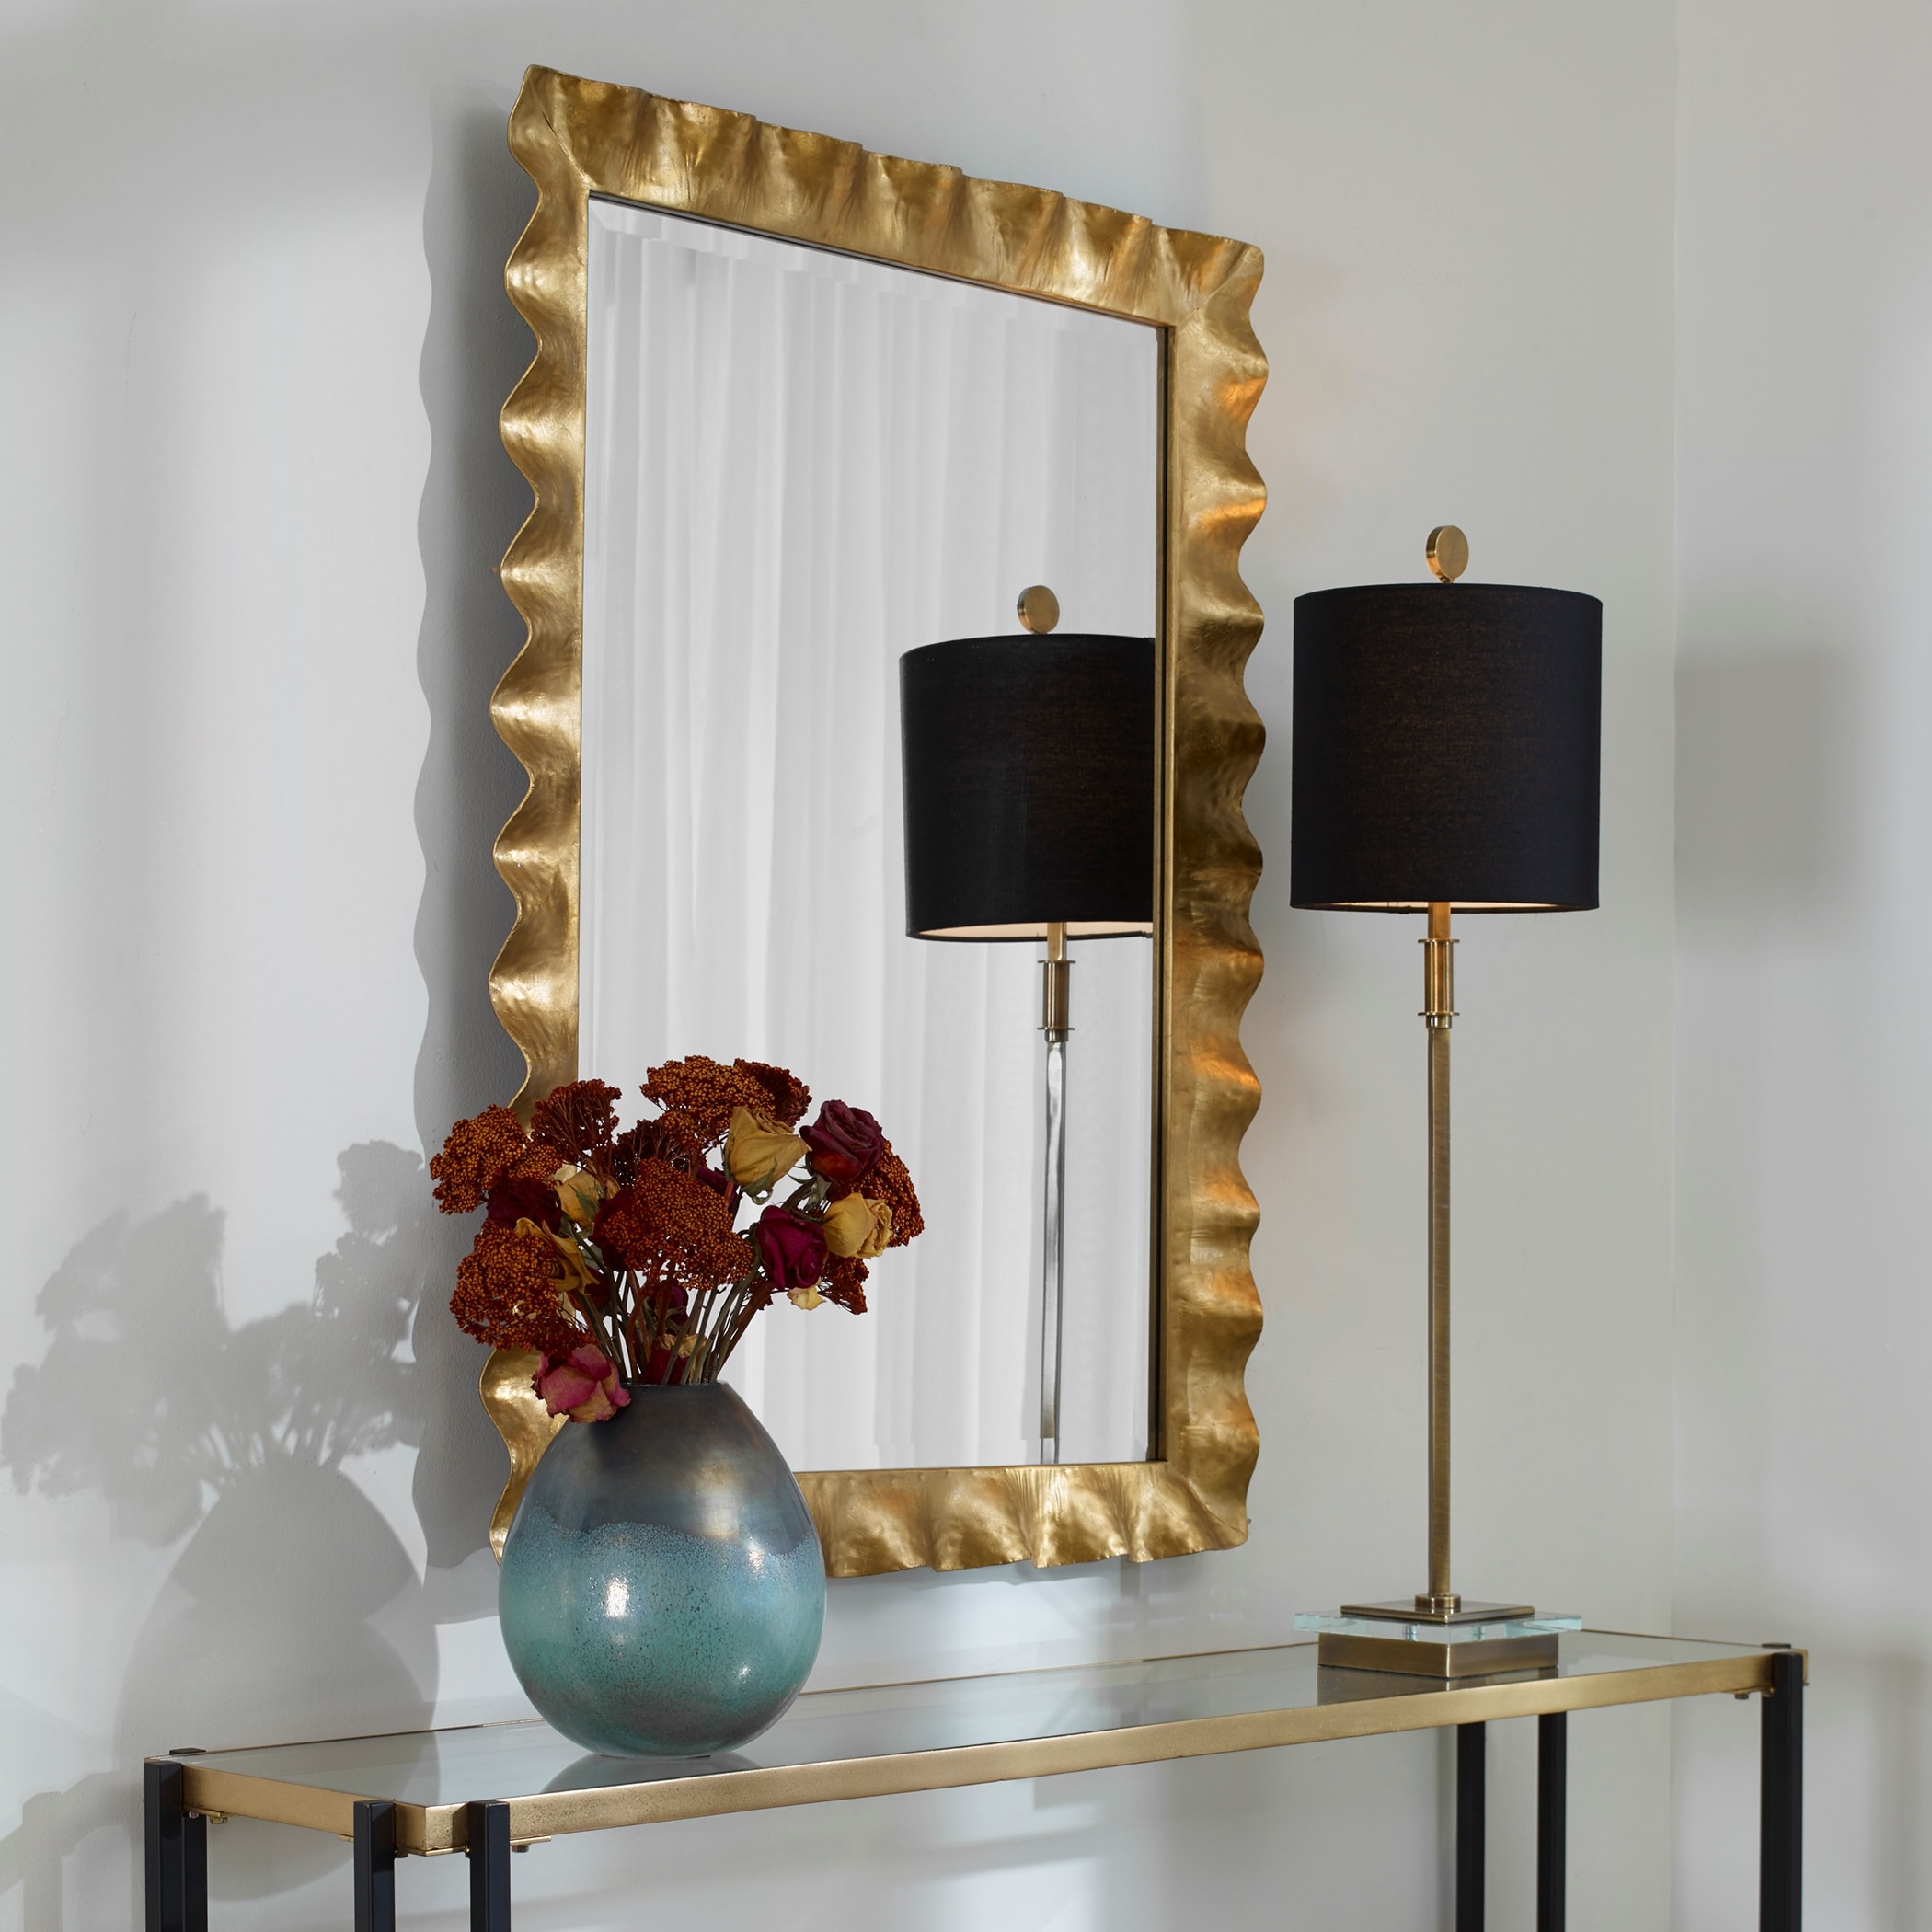 Uttermost Allick Gold Square Mirrors, Set of Two 09234